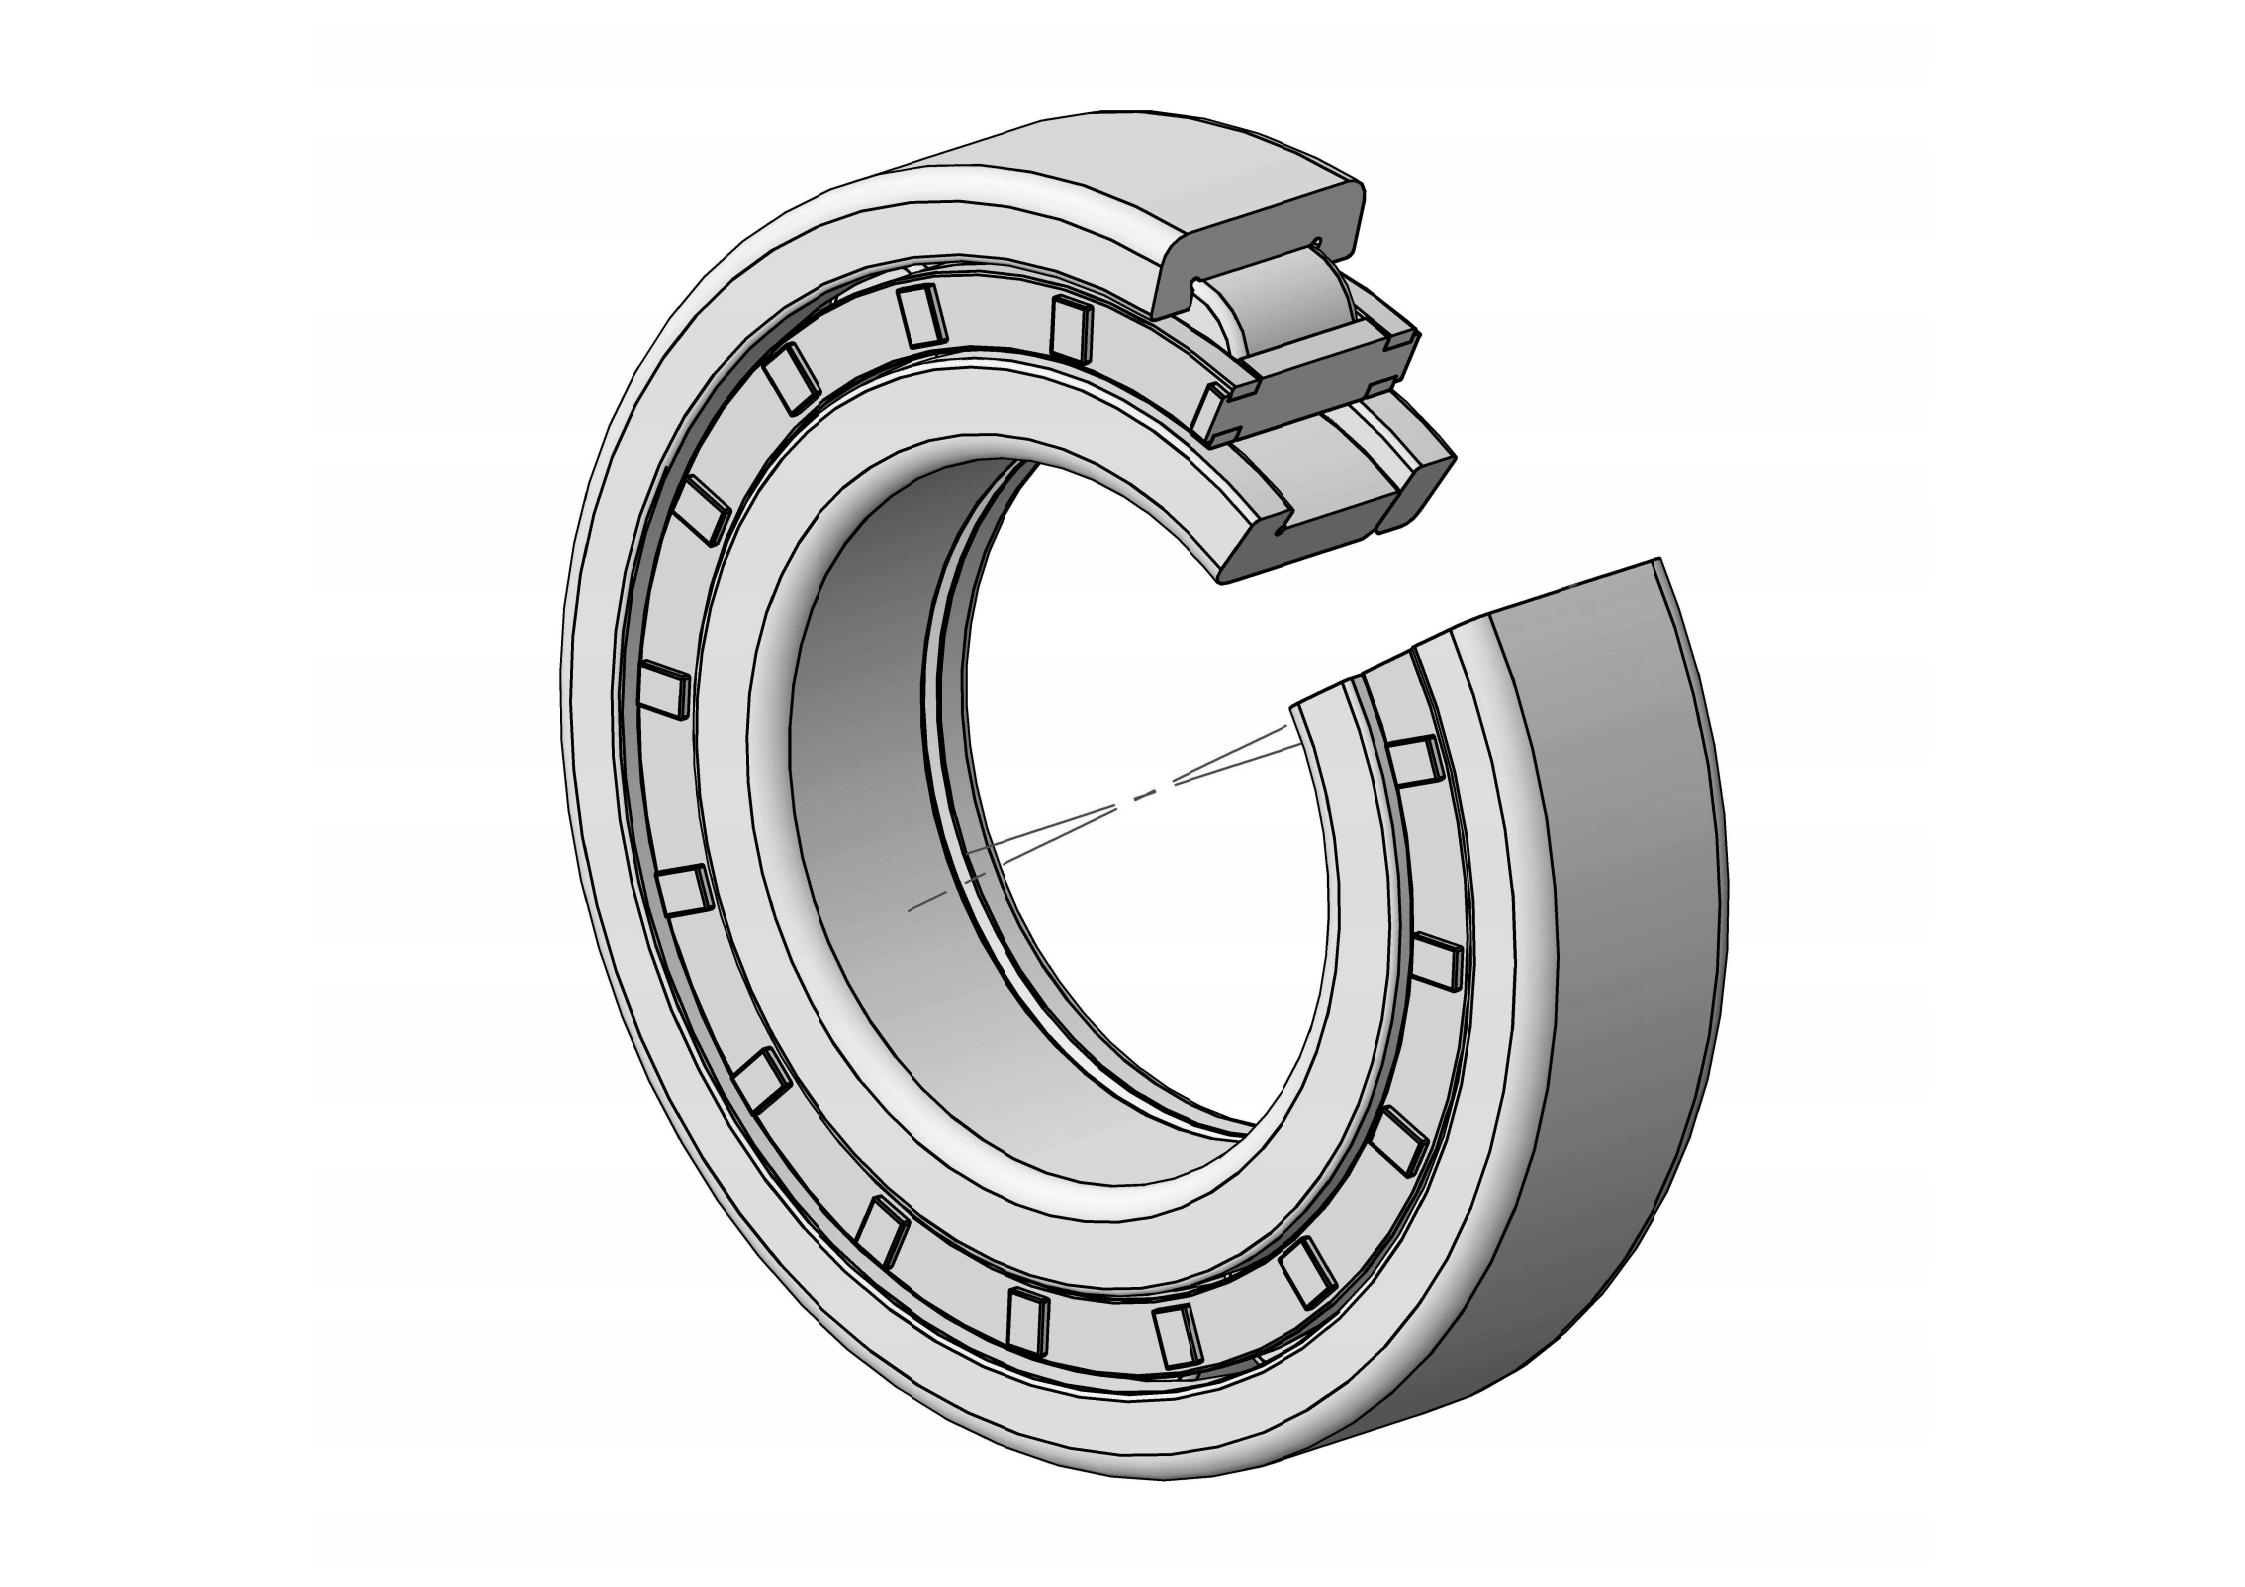 NUP210-E Single Row Cylindrical roller bearing 